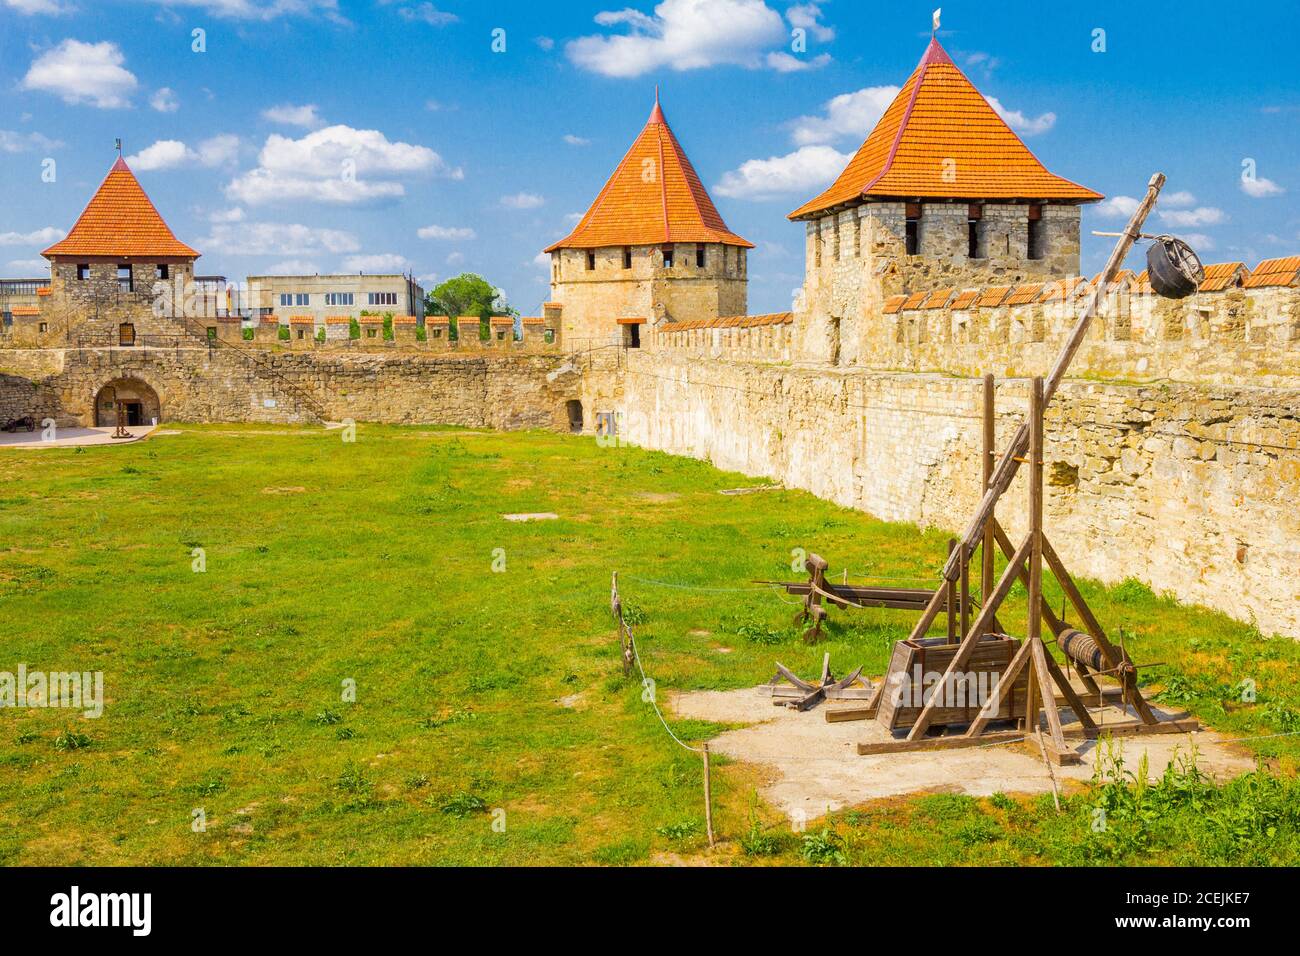 Bendery, Transdniestria 25 may 2018: catapult trebuchet in Old fortress on the river Dniester. City within the borders of Moldova under of the control Stock Photo